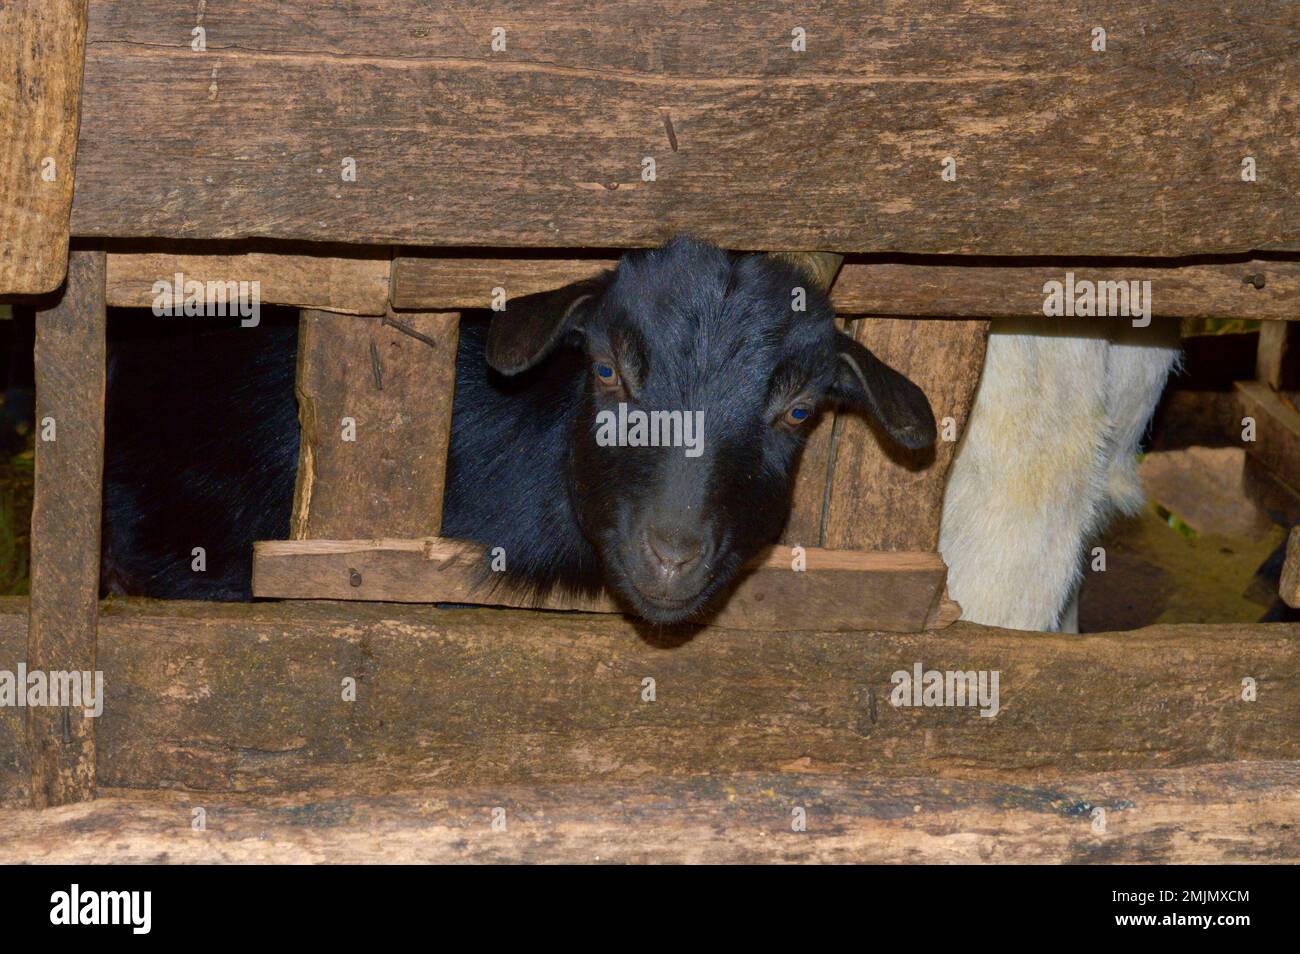 Goats peeking out from wooden fence on the farm Stock Photo